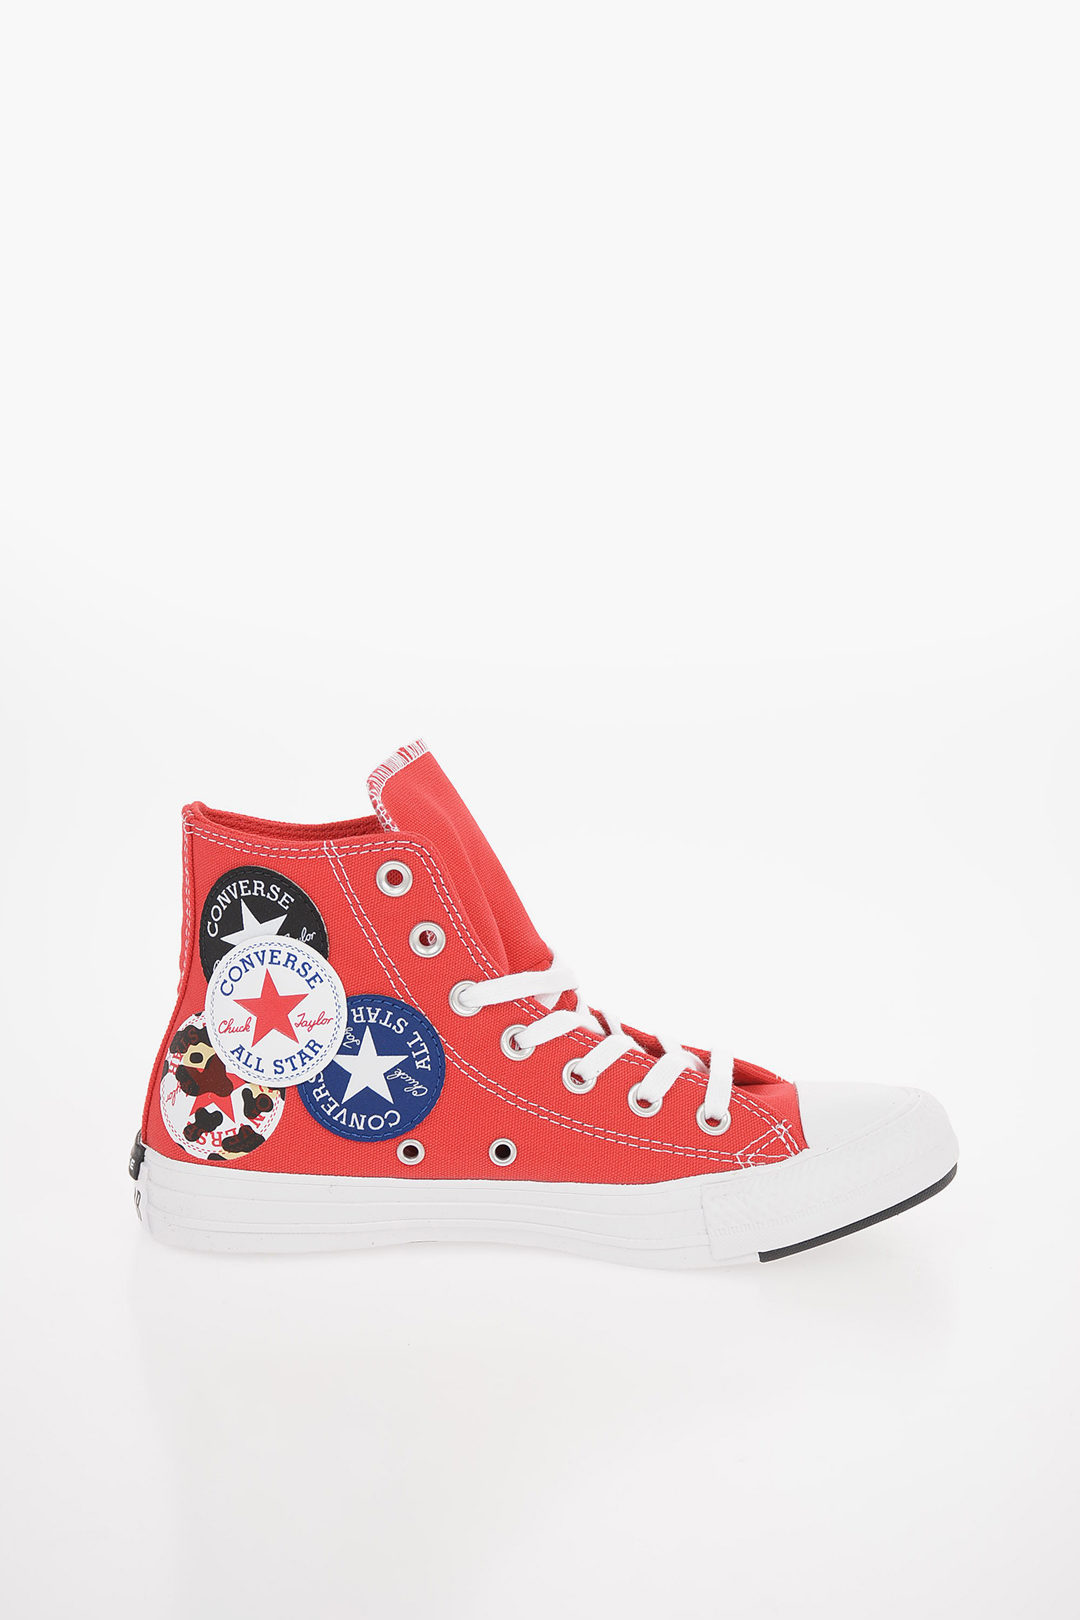 CHUCK TAYLOR ALL STAR Patches High-top Sneakers